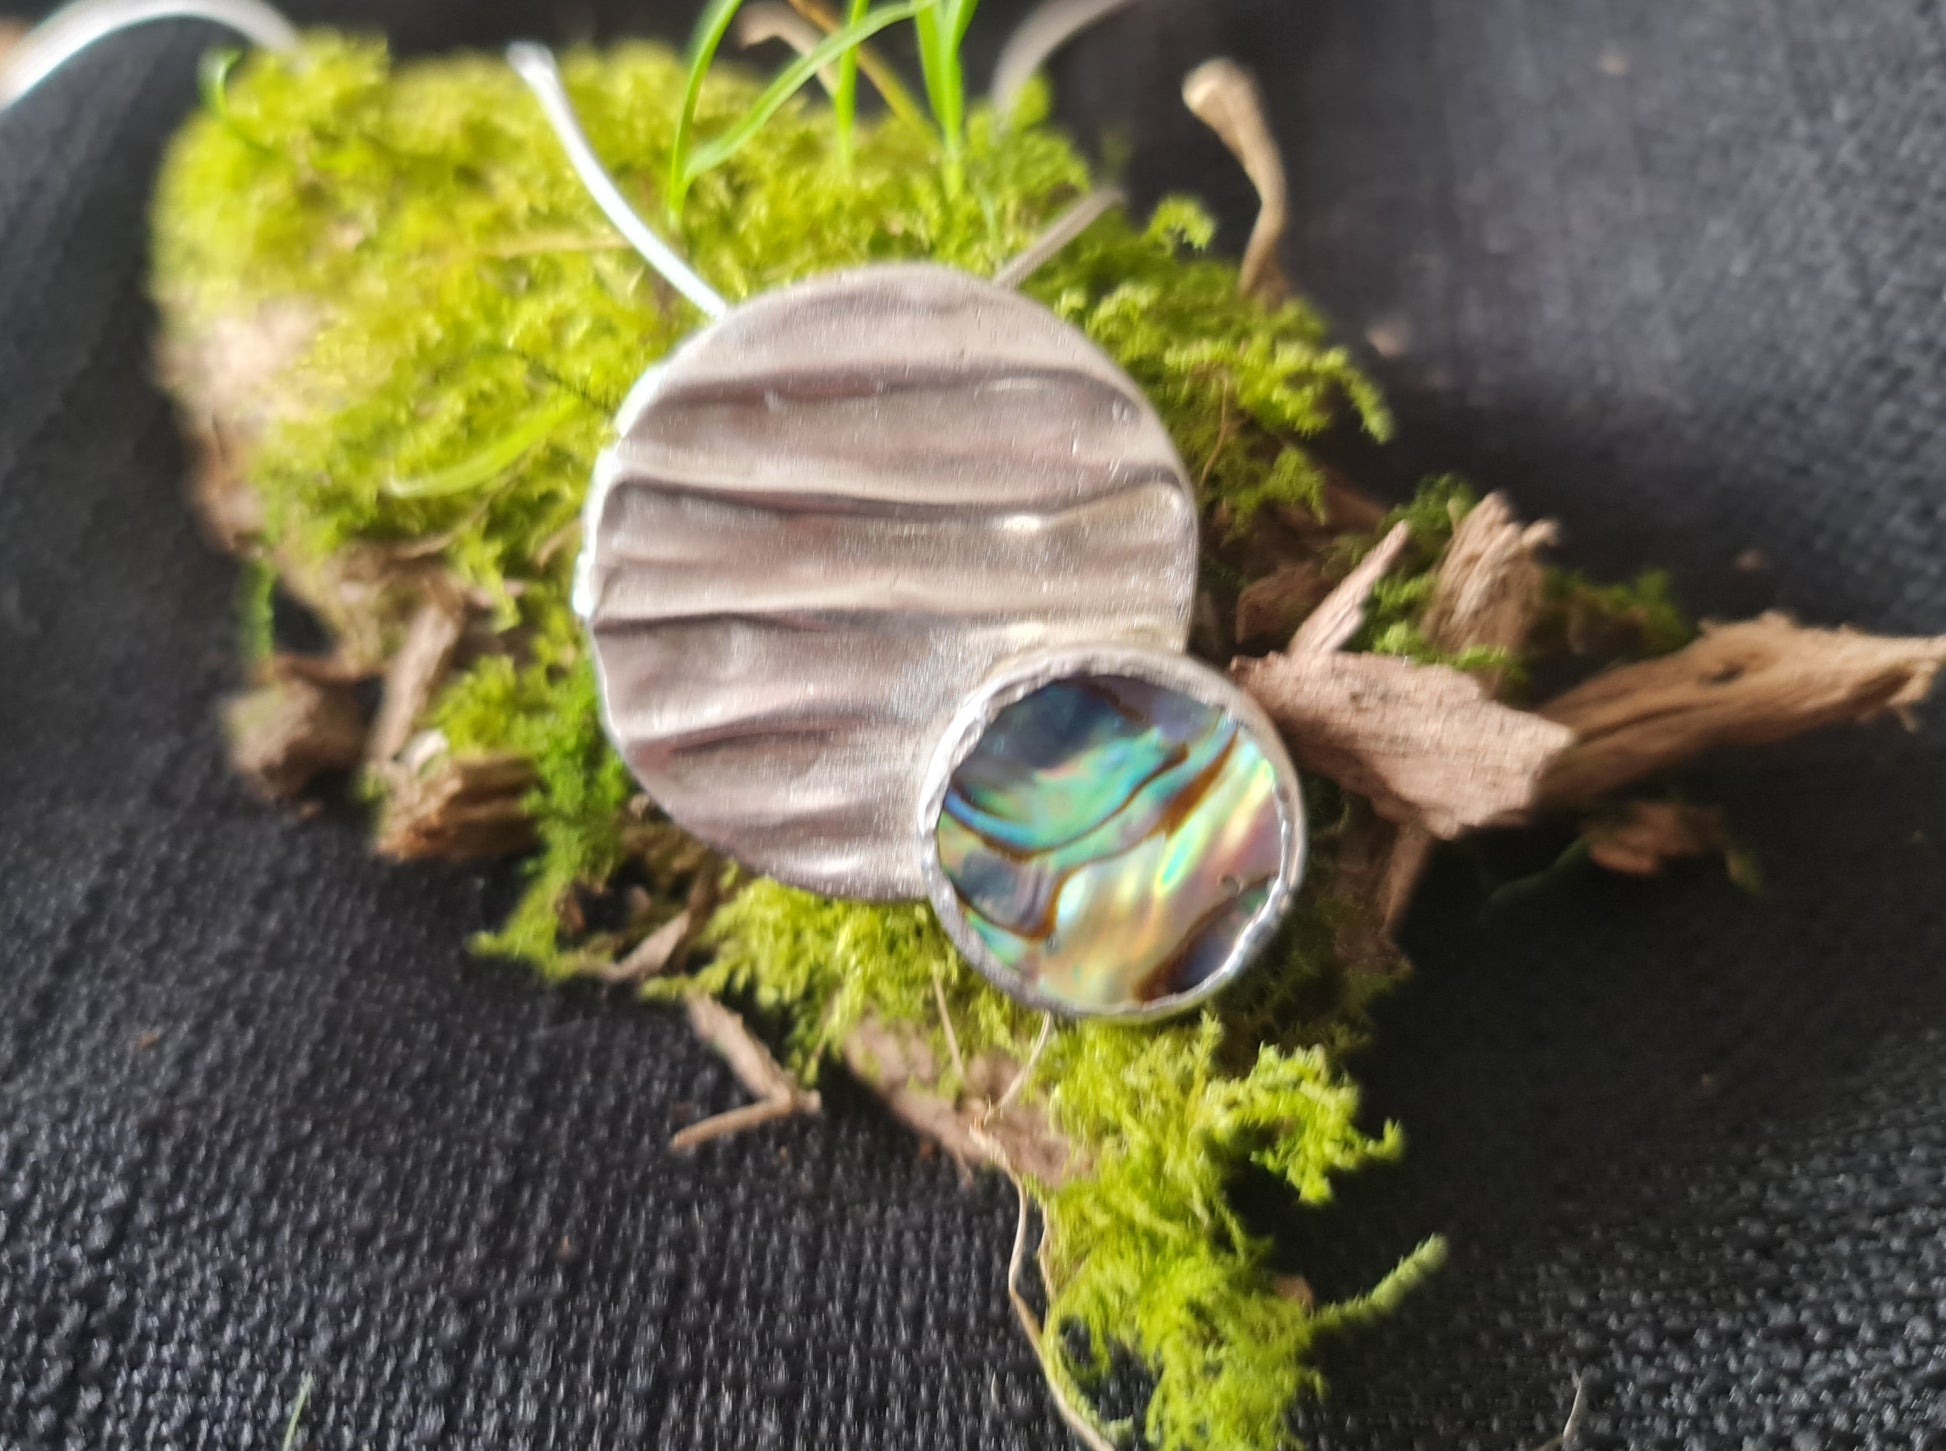 handmade sterling silver rippled pendant with a beautiful blue and green paua shell placed off centre.  The pendant is sitting on a moss cushion.